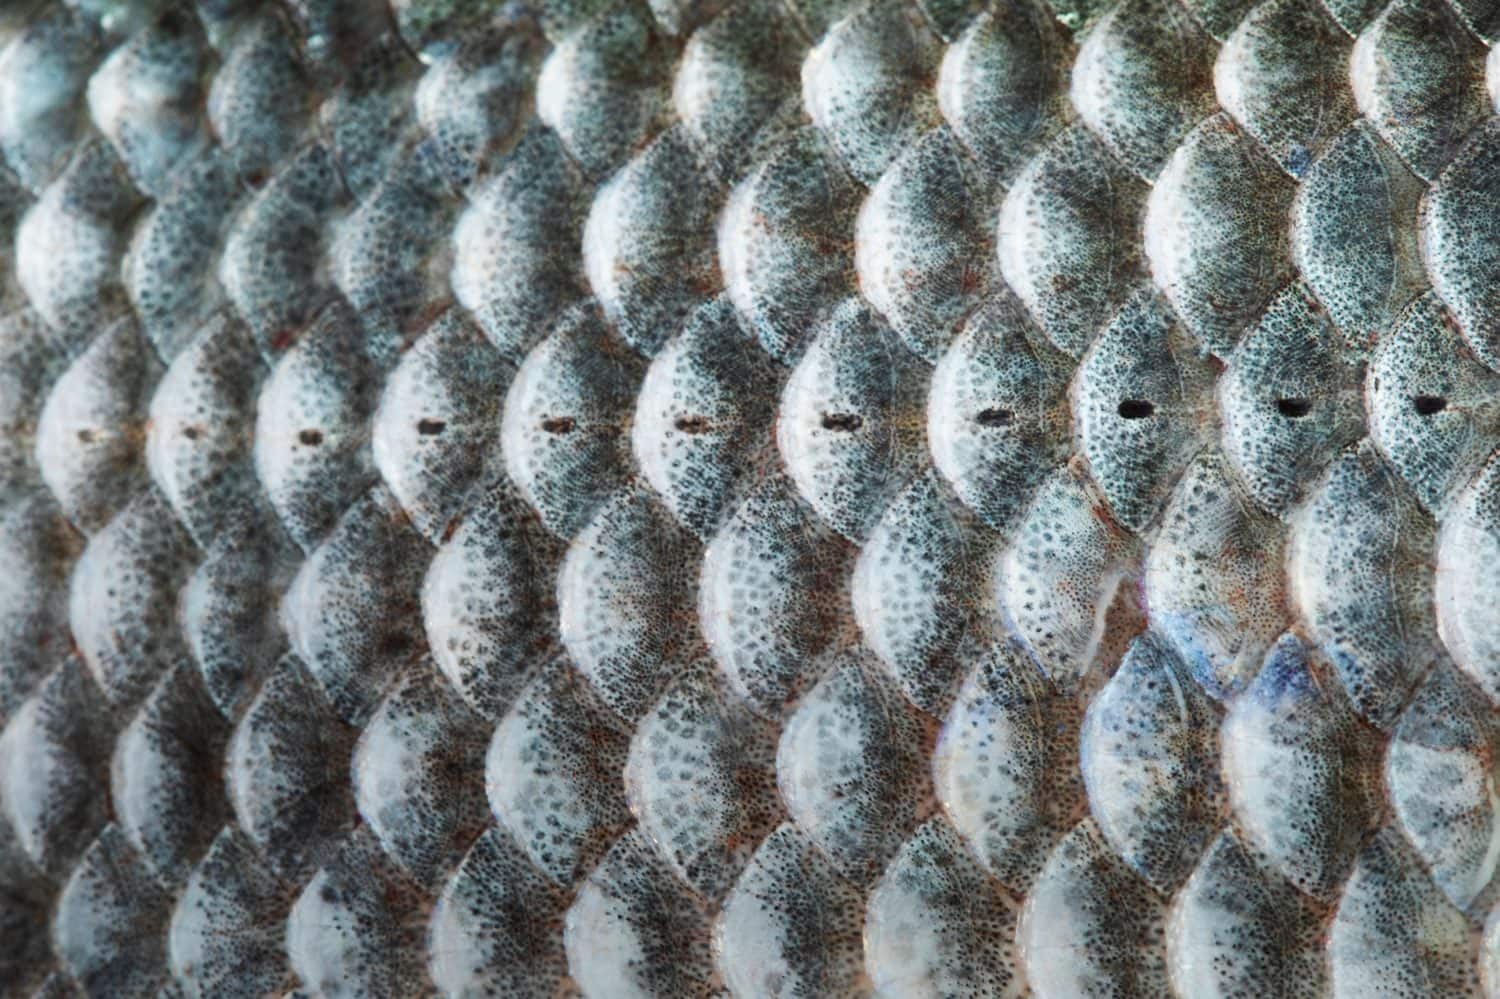 Fish scales skin textured pattern photo. Macro view Crucian carp Carassius scaly with Lateral line. Selective focus, shallow depth field.